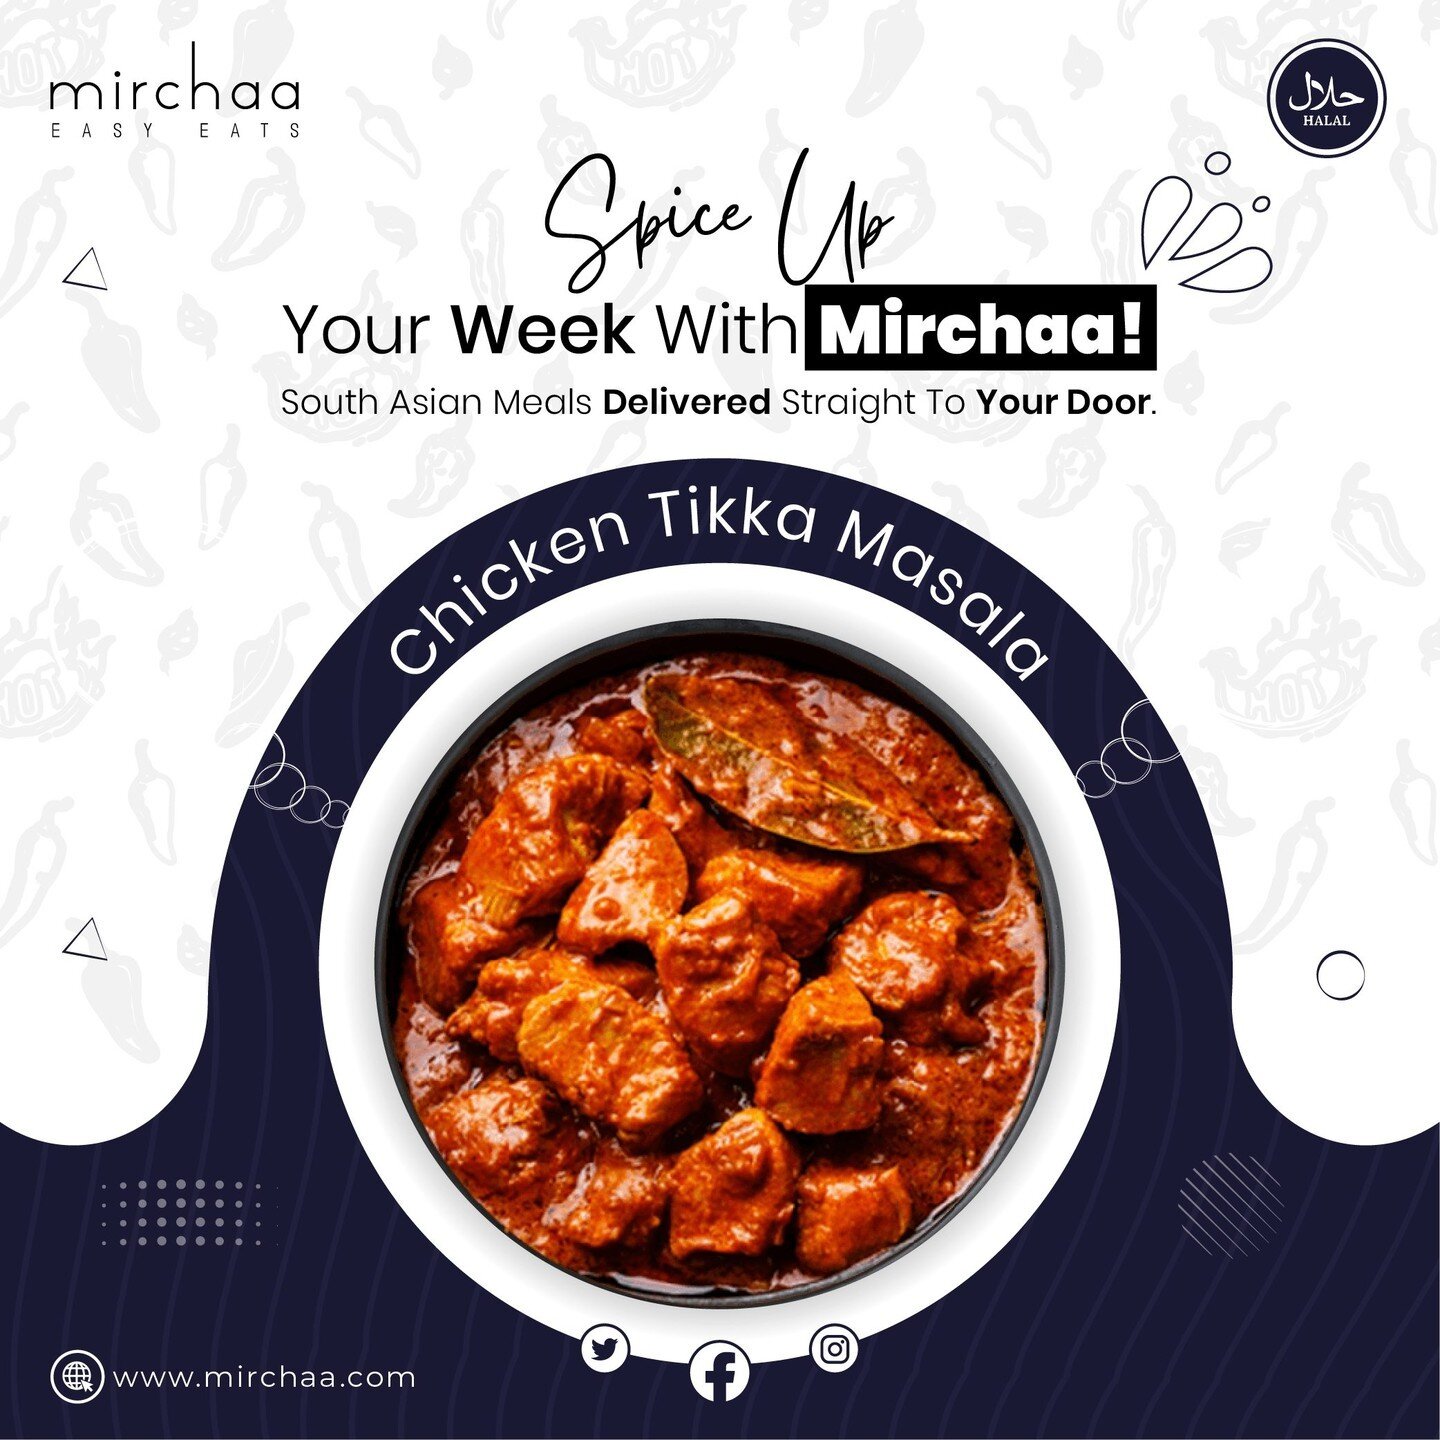 Spice up your week with Mirchaa! 🌶️ Fresh, ready-to-eat South Asian meals delivered straight to your door. Handcrafted with love, 100% halal, and no freezing involved. Just heat, eat, and savor the flavors! #MirchaaMagic #FreshSouthAsianCuisine